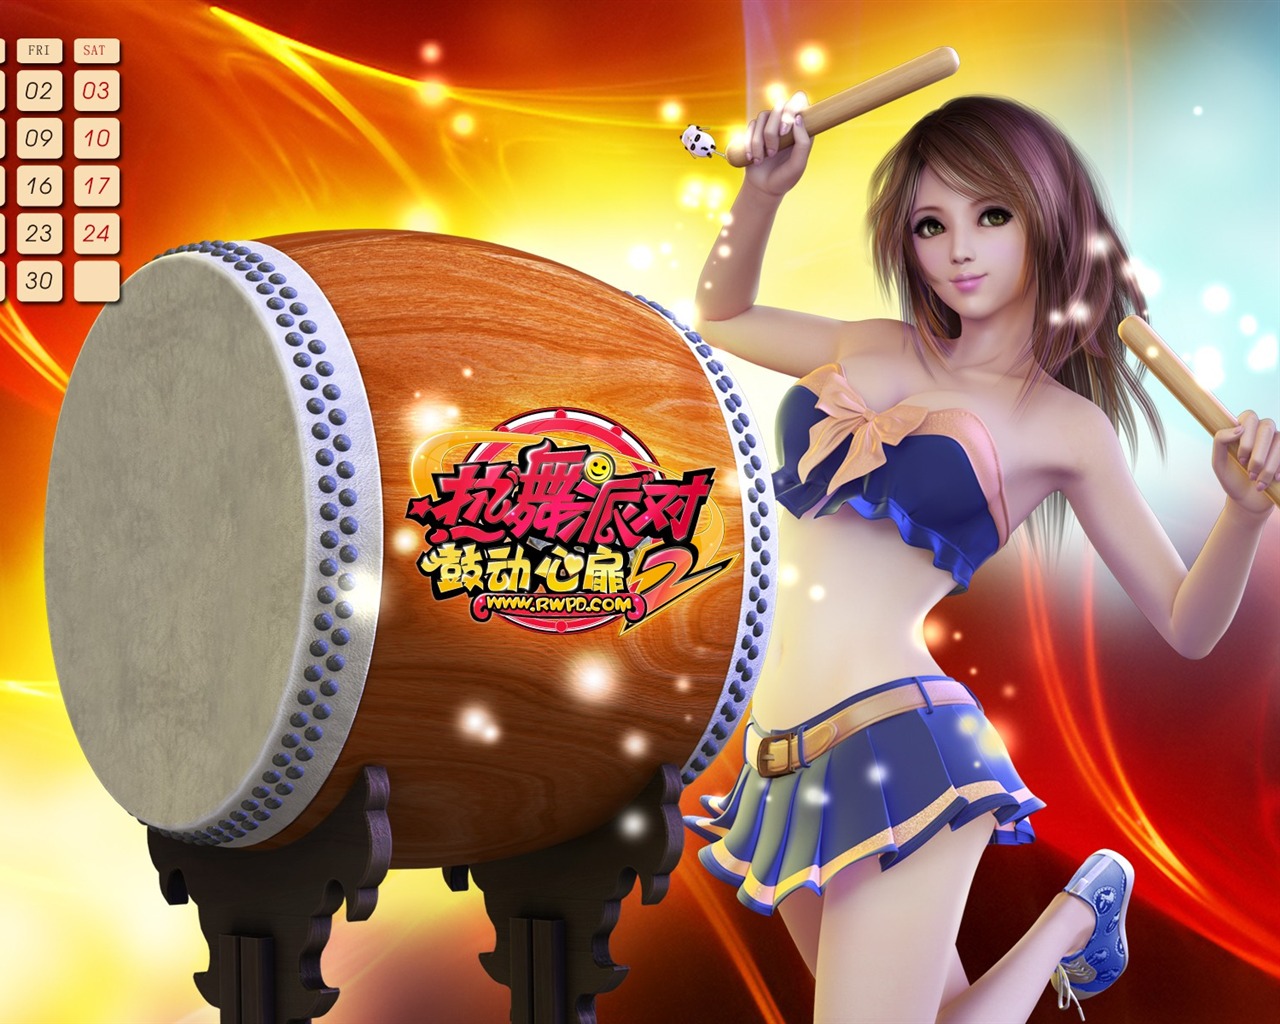 Online game Hot Dance Party II official wallpapers #10 - 1280x1024